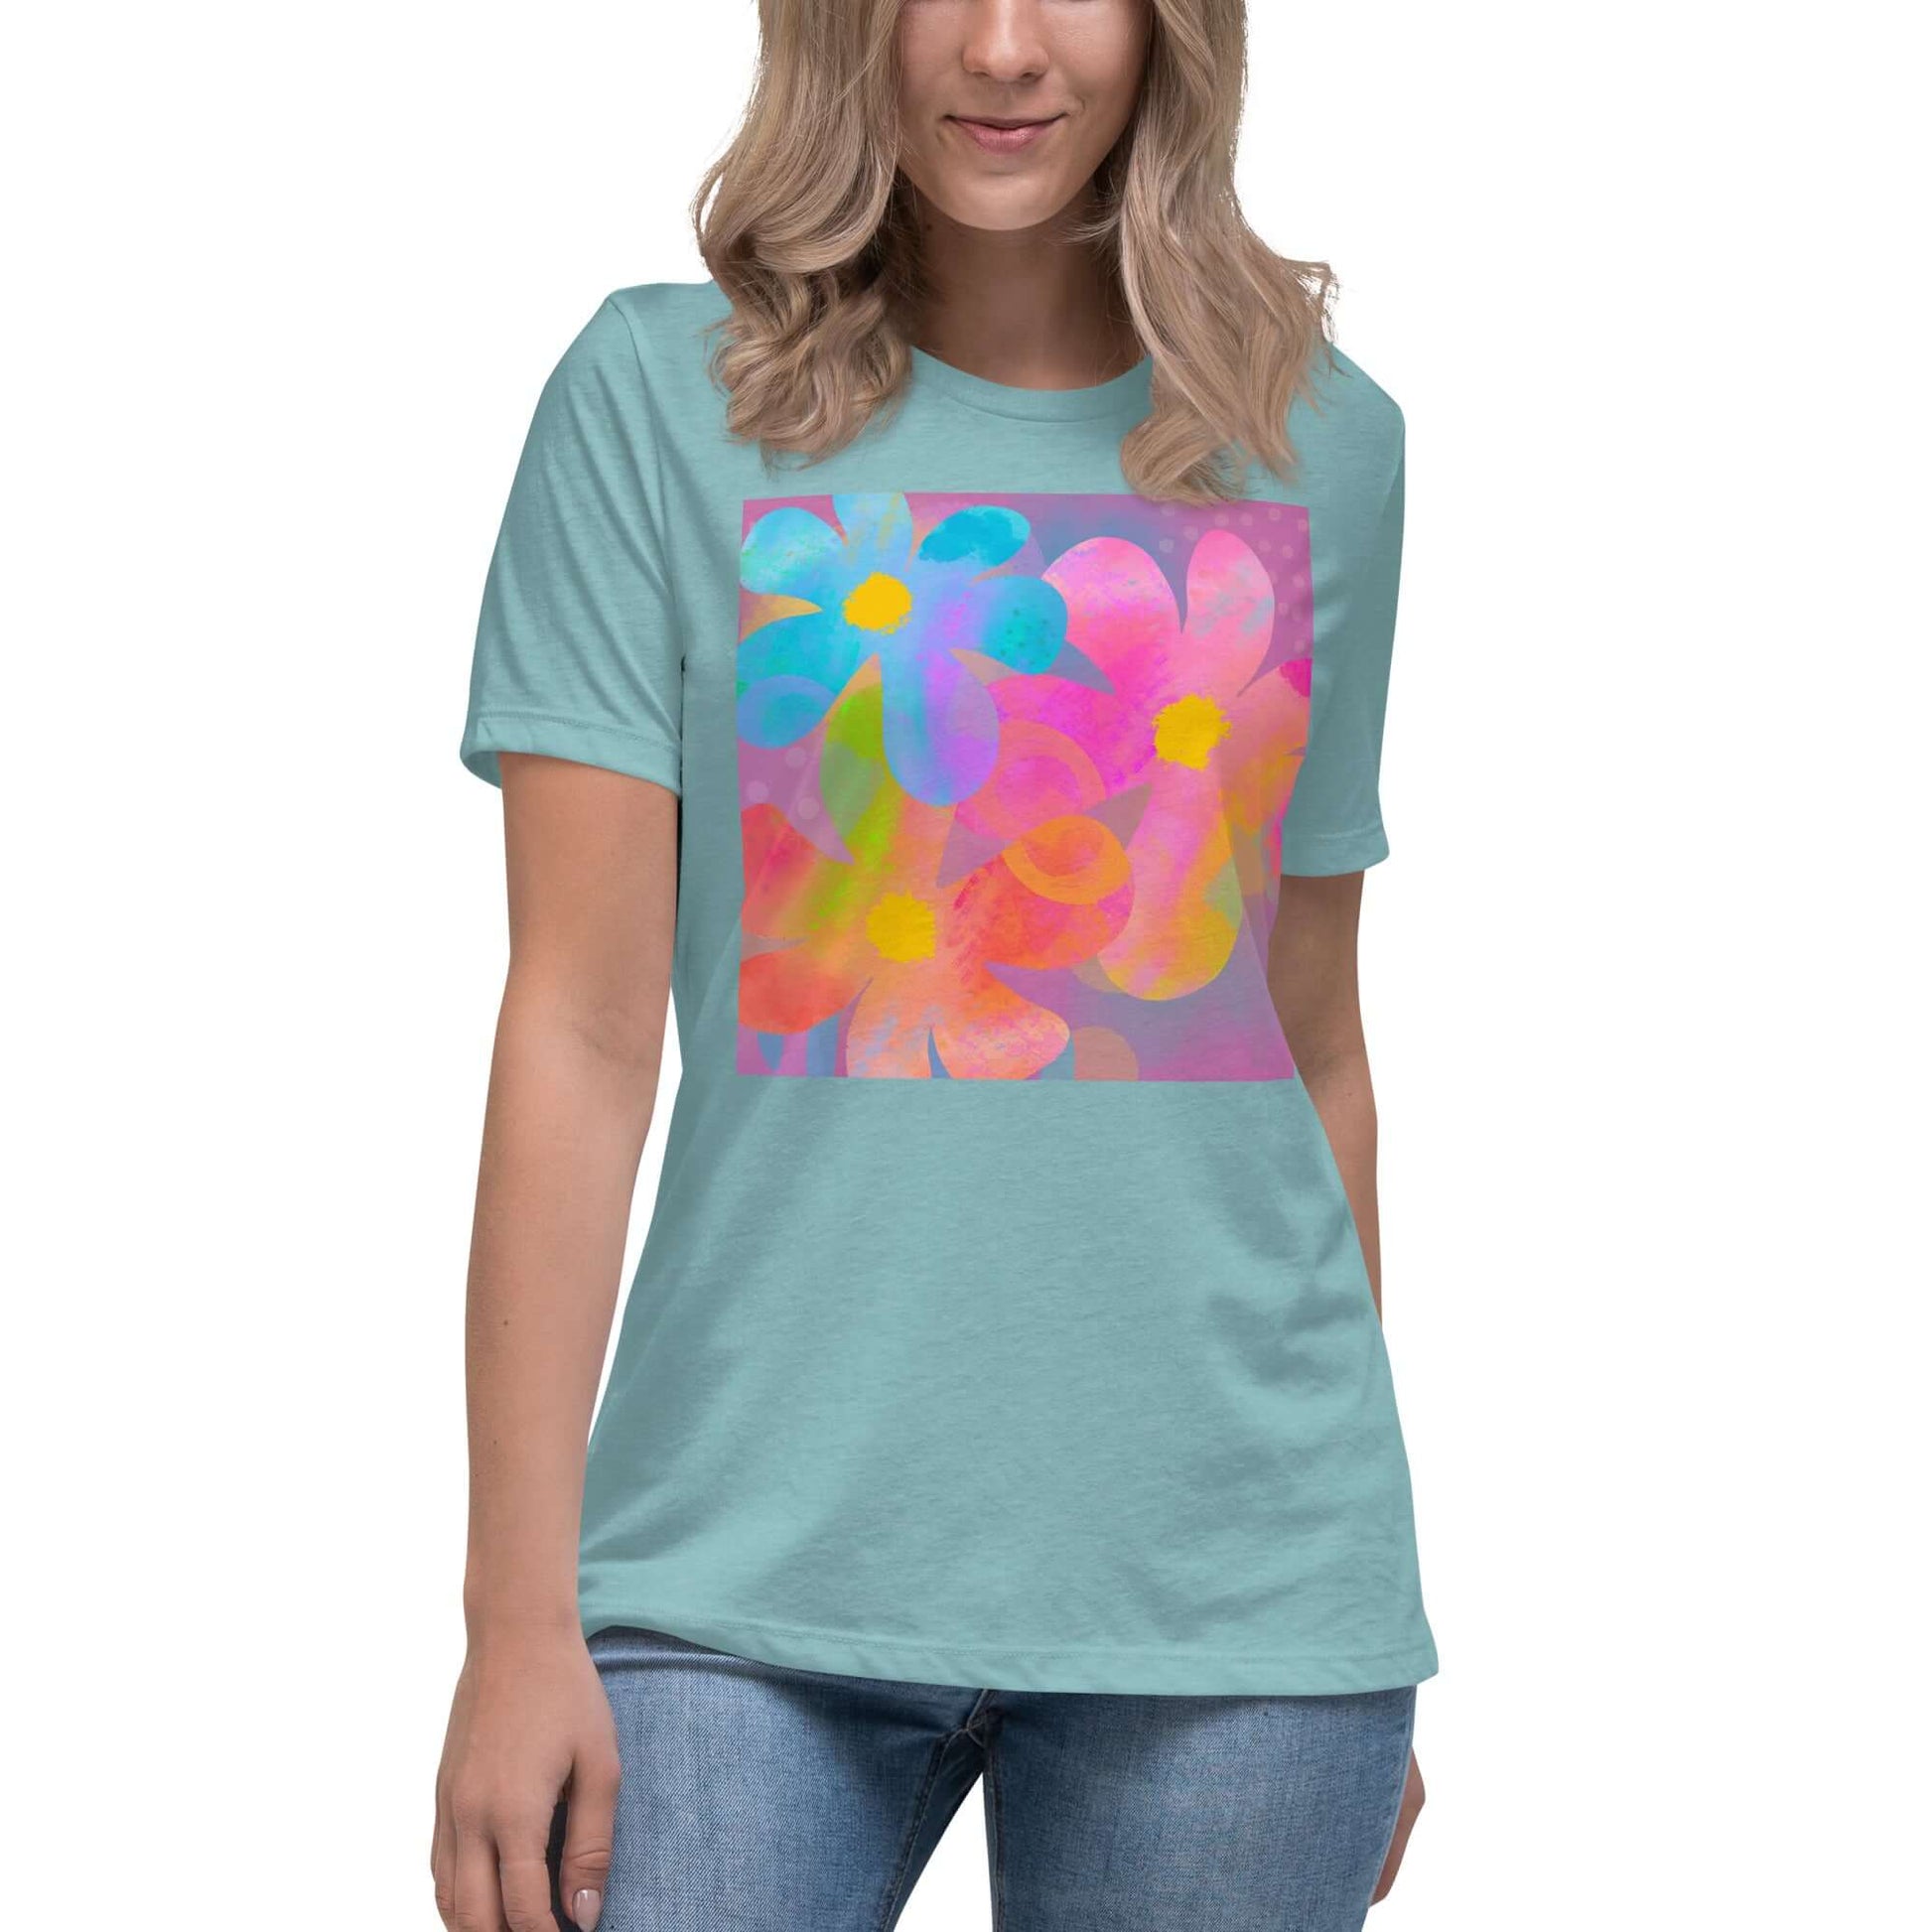 Big Colorful 1960s Psychedelic “Hippie Flowers” Women’s Short Sleeve Tee in Heather Blue Lagoon